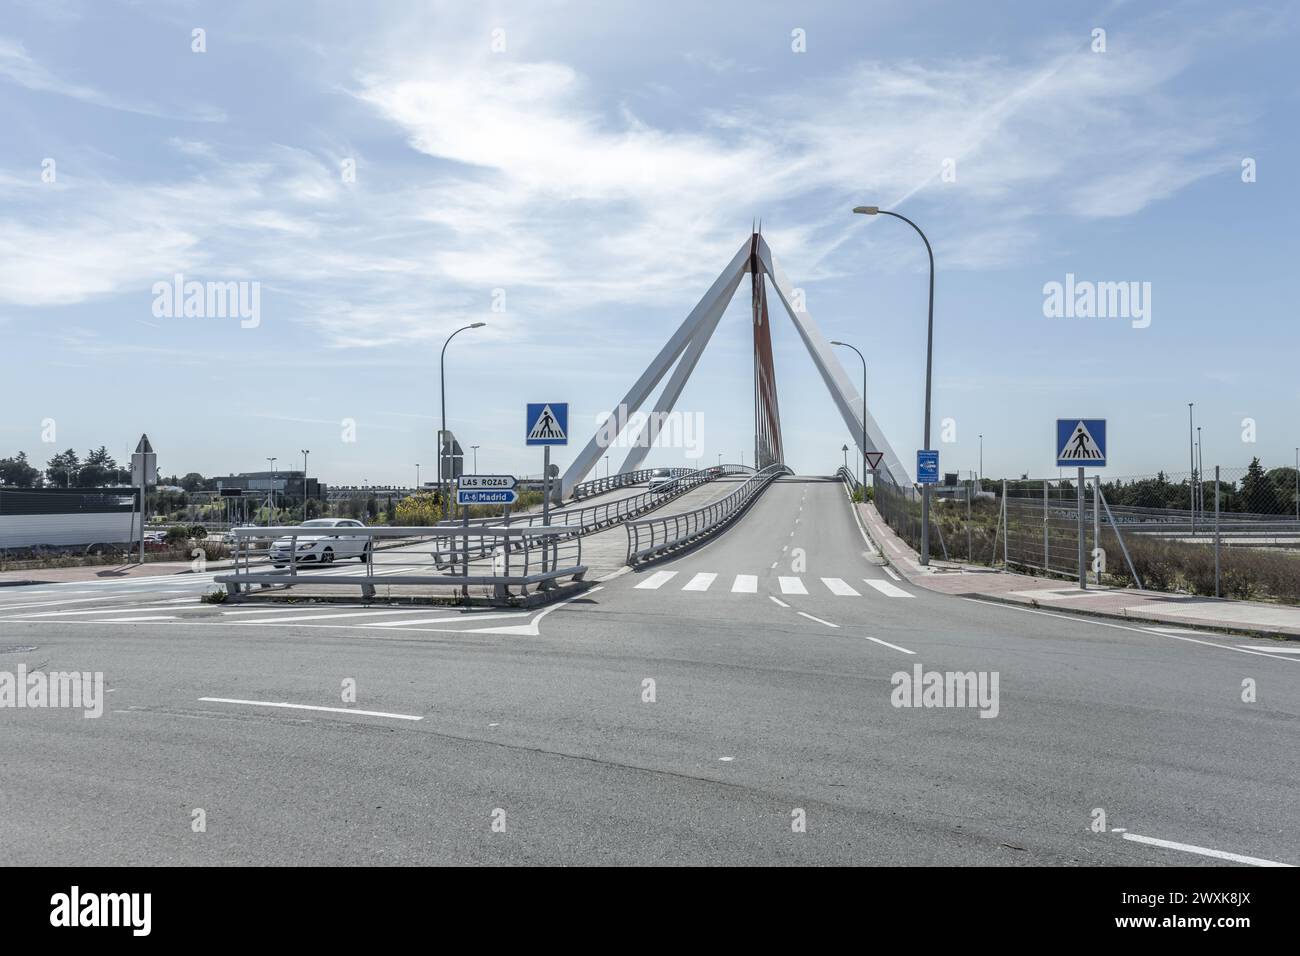 Image of the metal structure of a small bridge for road traffic and pedestrians, with indicative road traffic signage on a day with a bright sky Stock Photo